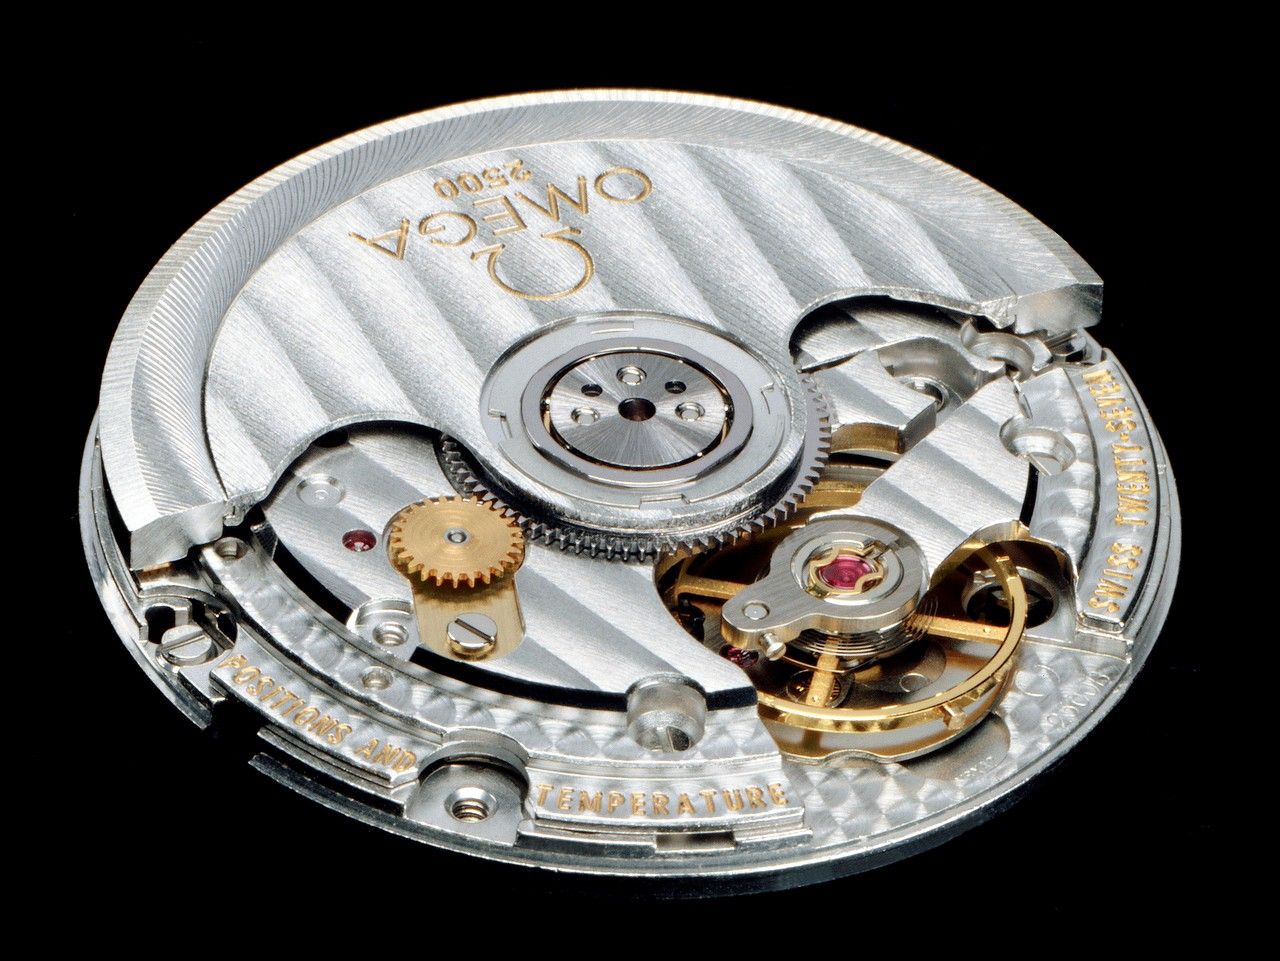 Cal.2500 Co-Axial Automatic Movement 